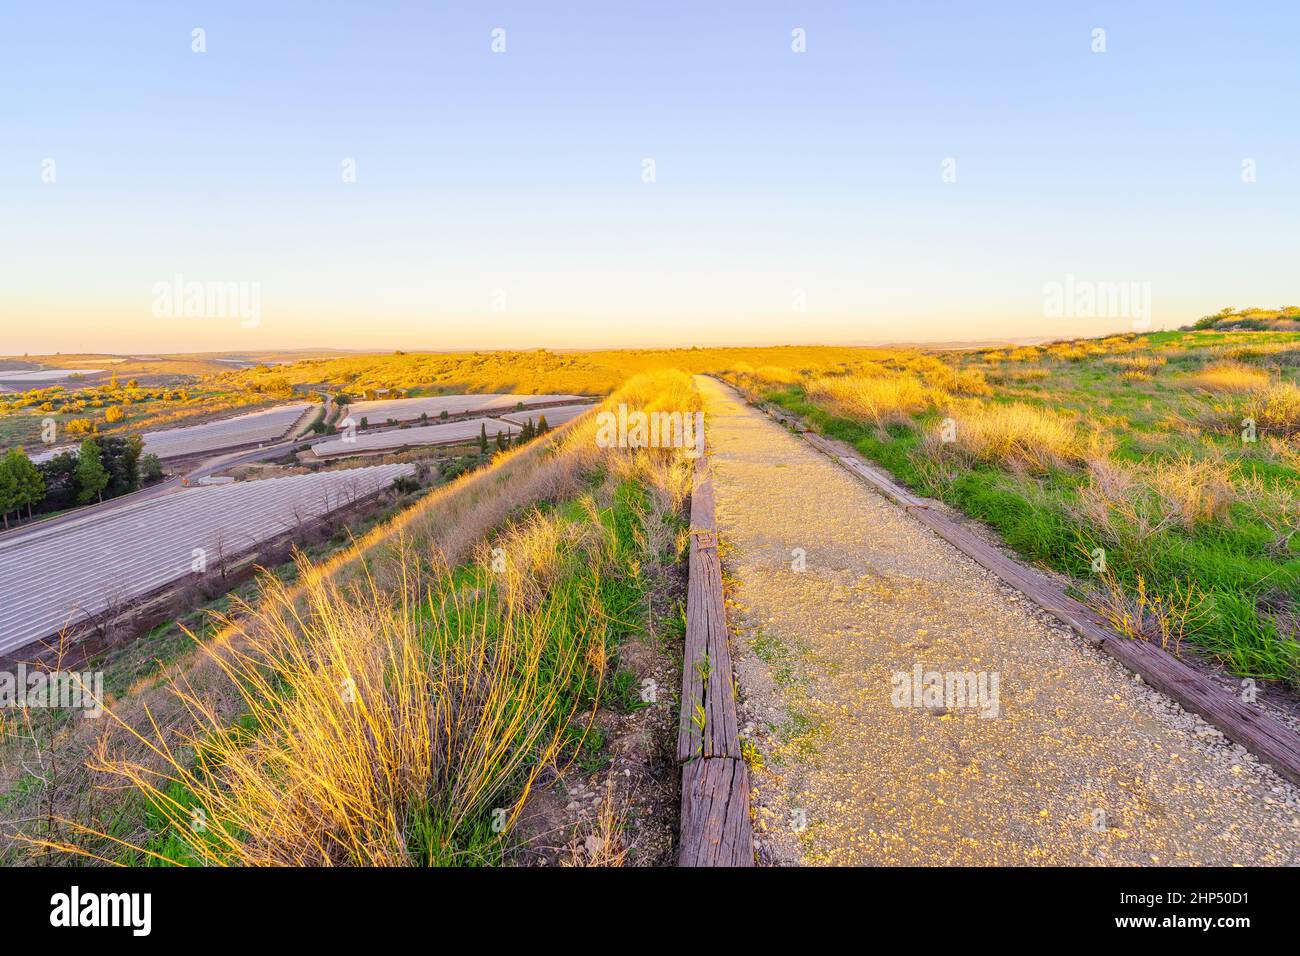 Sunset view of landscape in Lachish, the Northern Negev Desert, Southern Israel Stock Photo